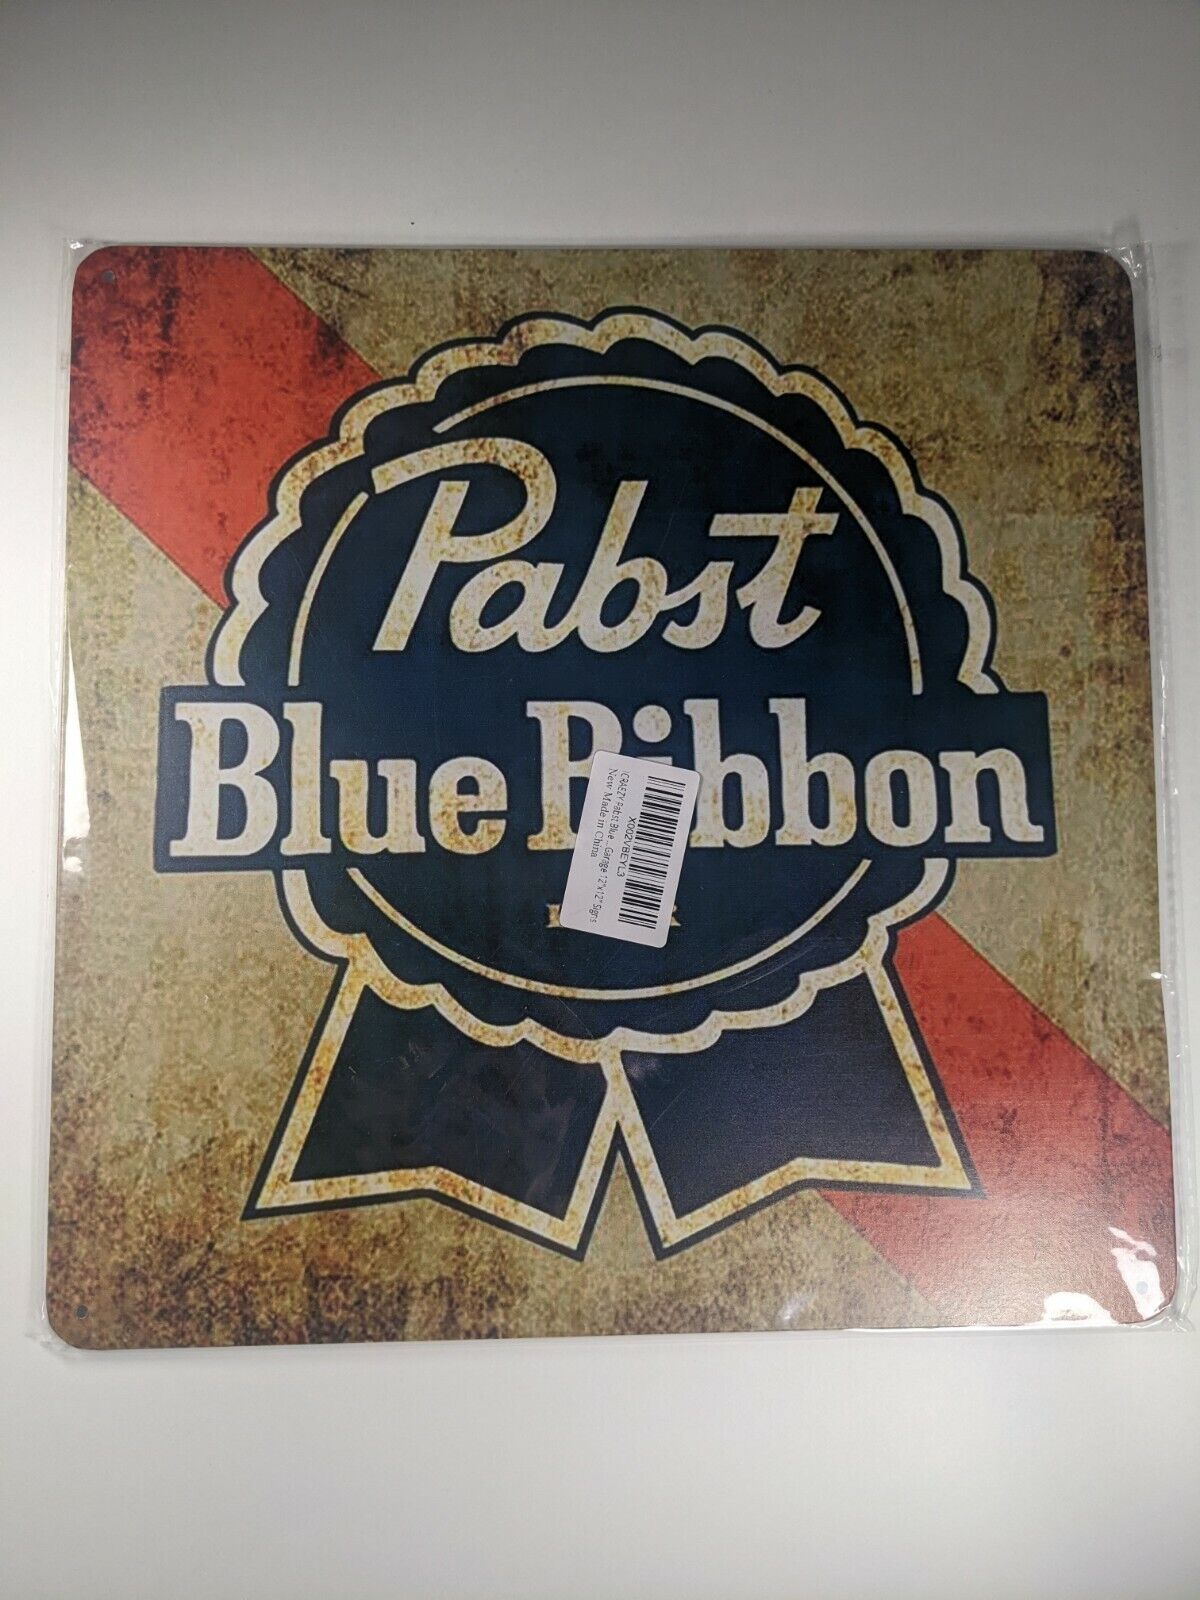 Pabst Blue Ribbon Beer Pbr Metal Sign Advertising Reproduction 12x12 Garage Sign